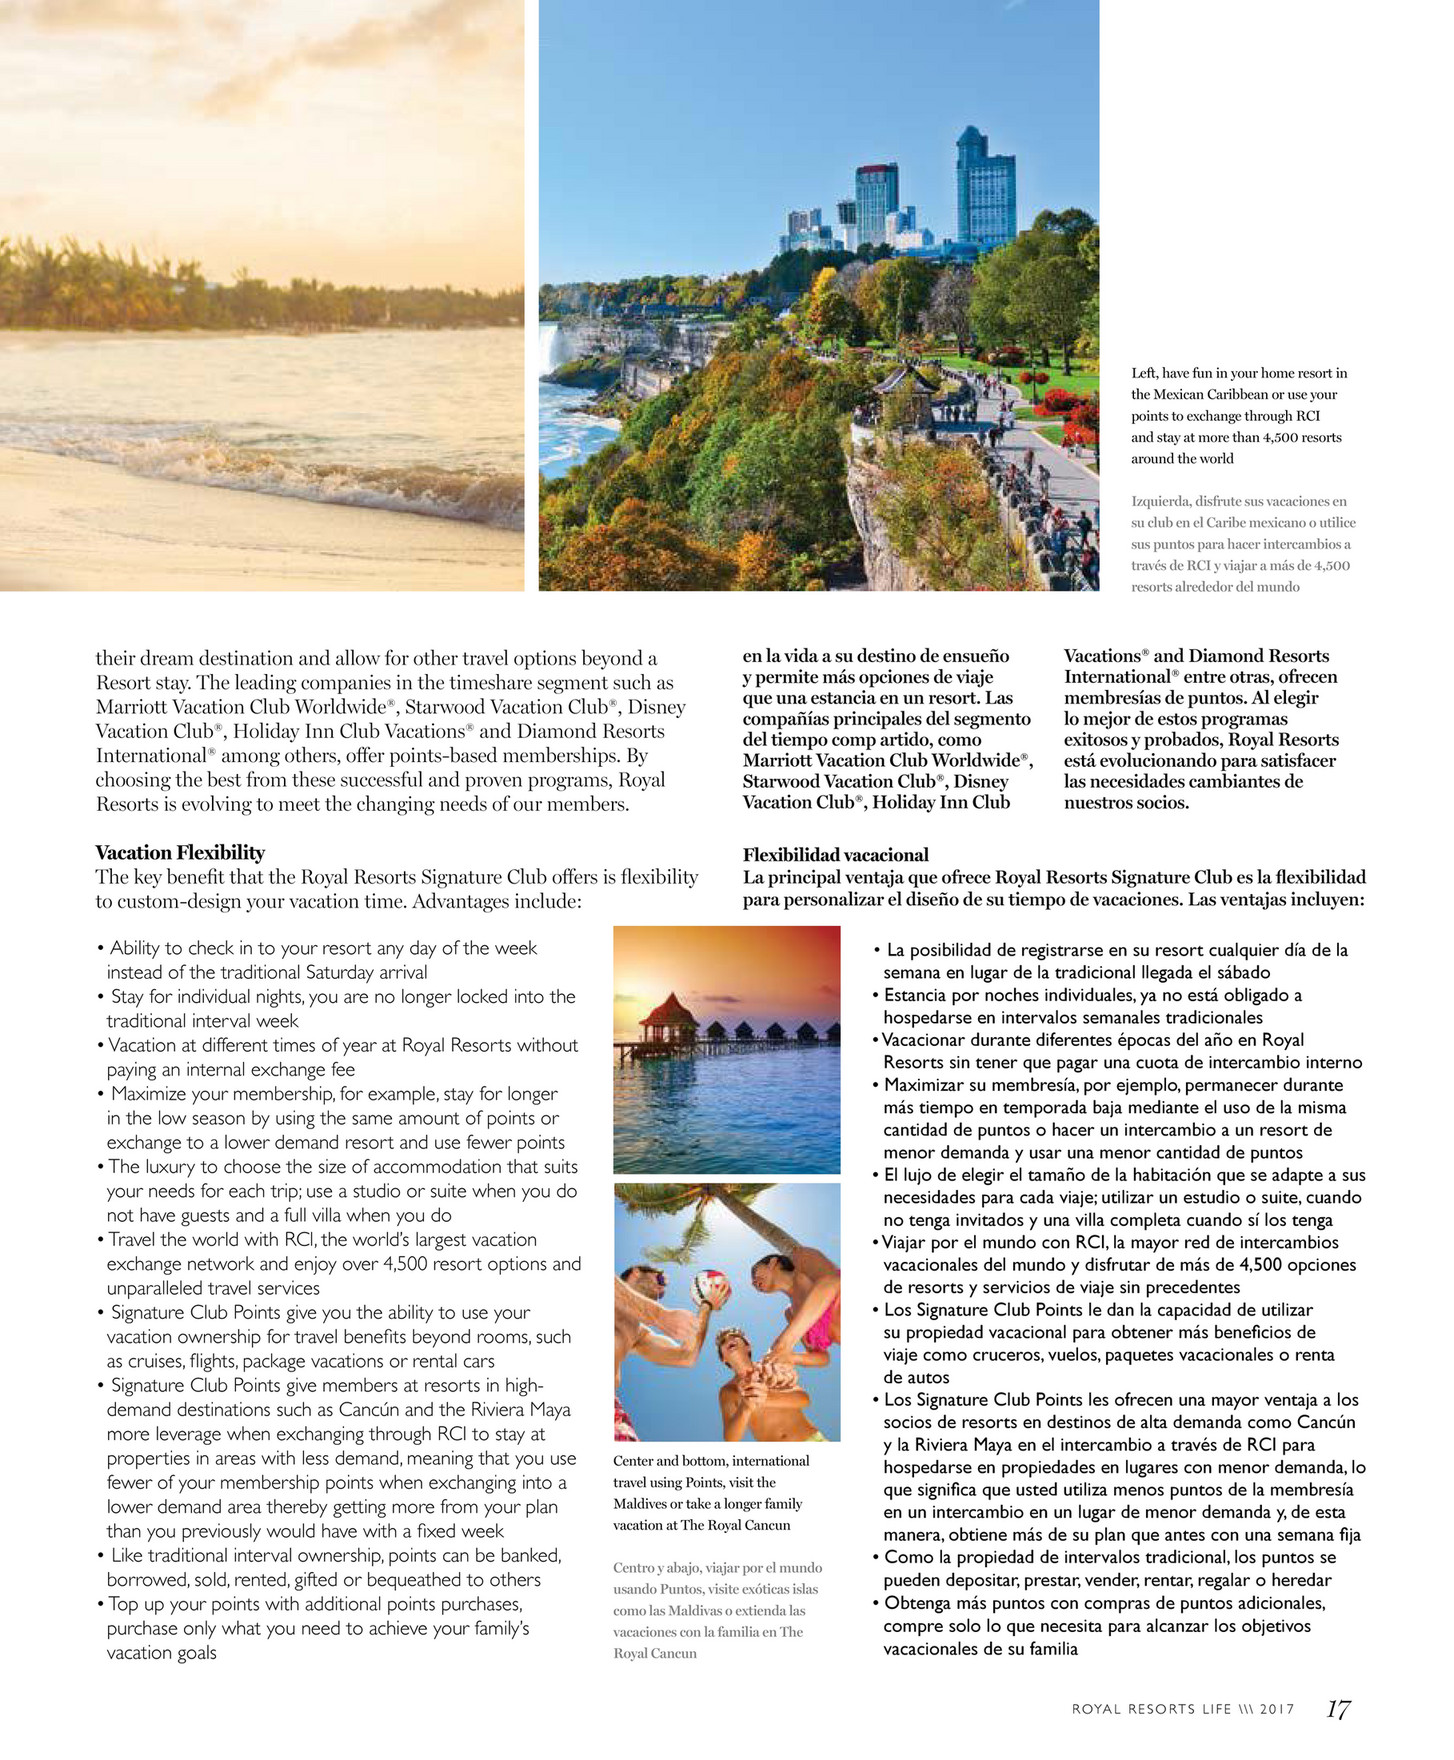 2du - Royal Resorts Life Magazine - Page 18-19 - Created with 